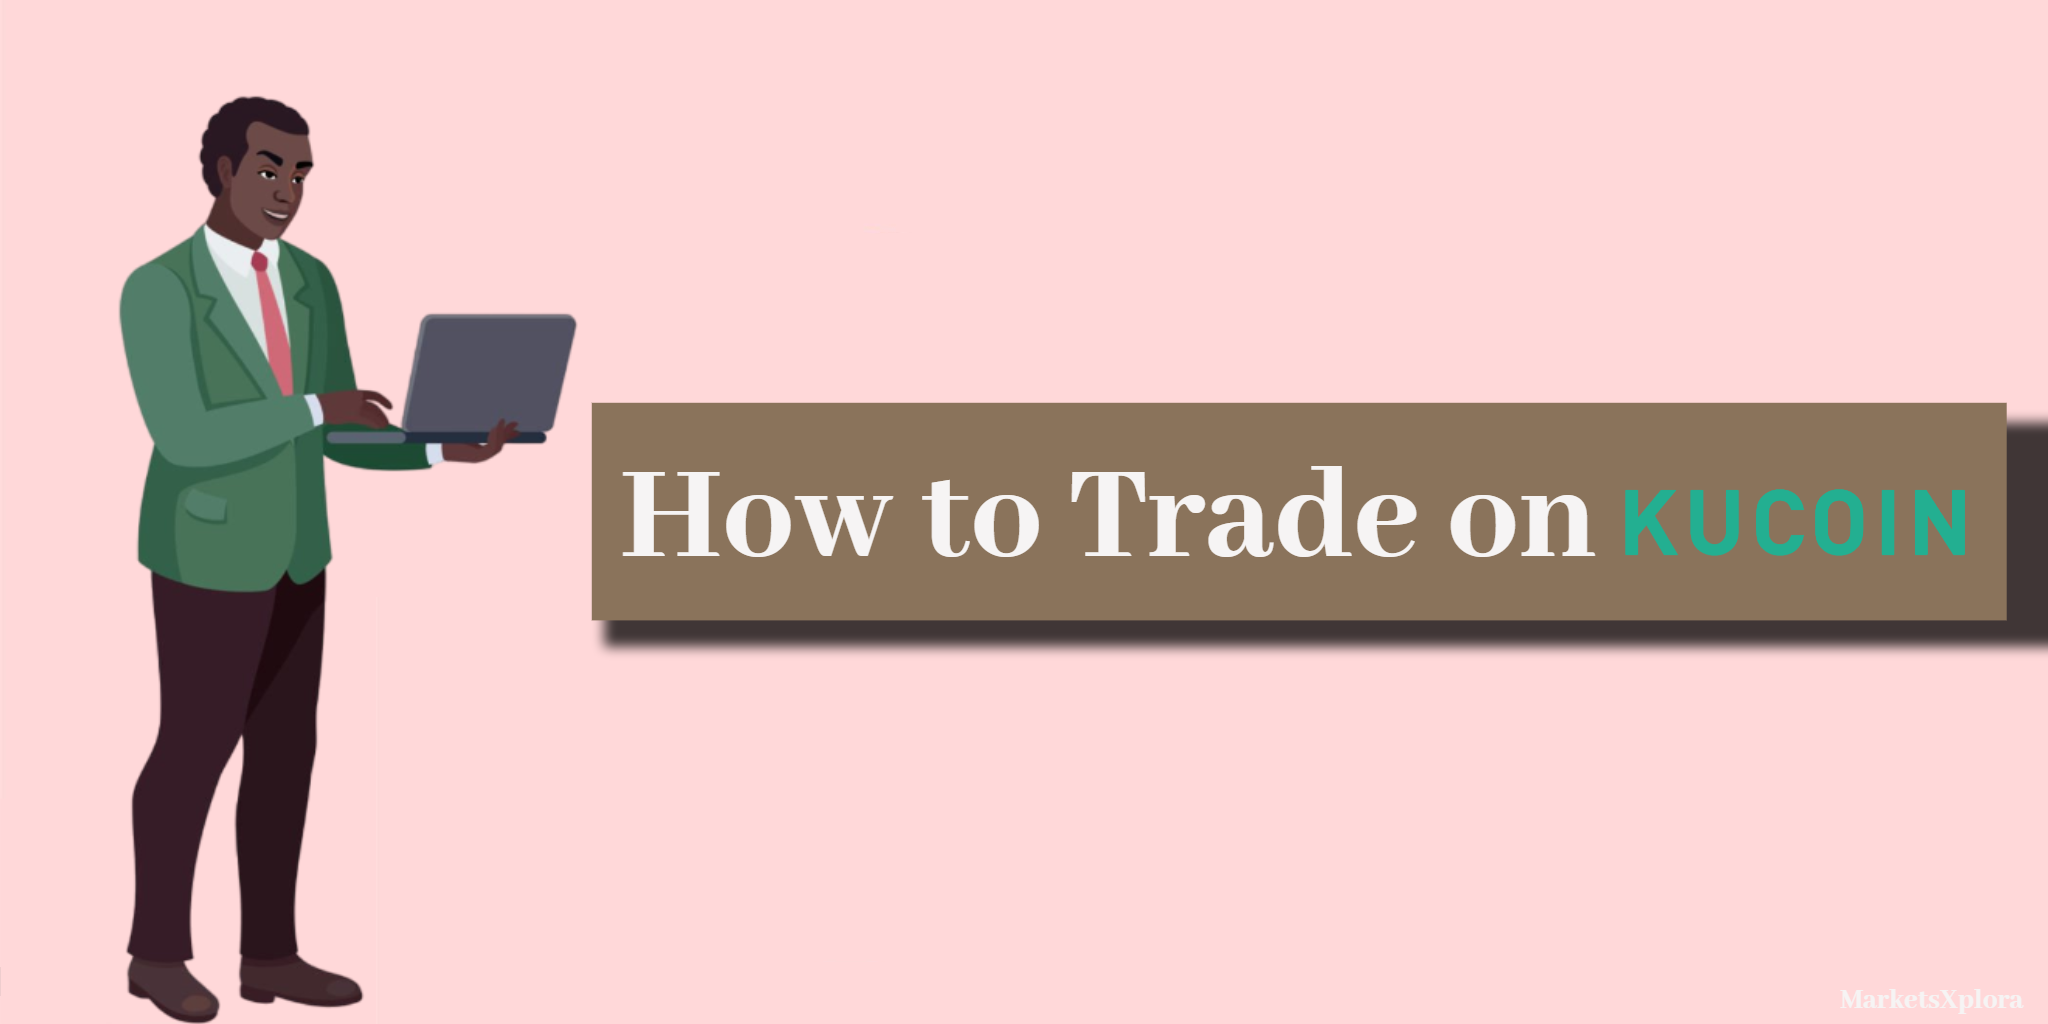 Learn How to Trade on KuCoin for Beginners with this step-by-step guide. Discover how to create an account, deposit funds, navigate the trading interface, and more.